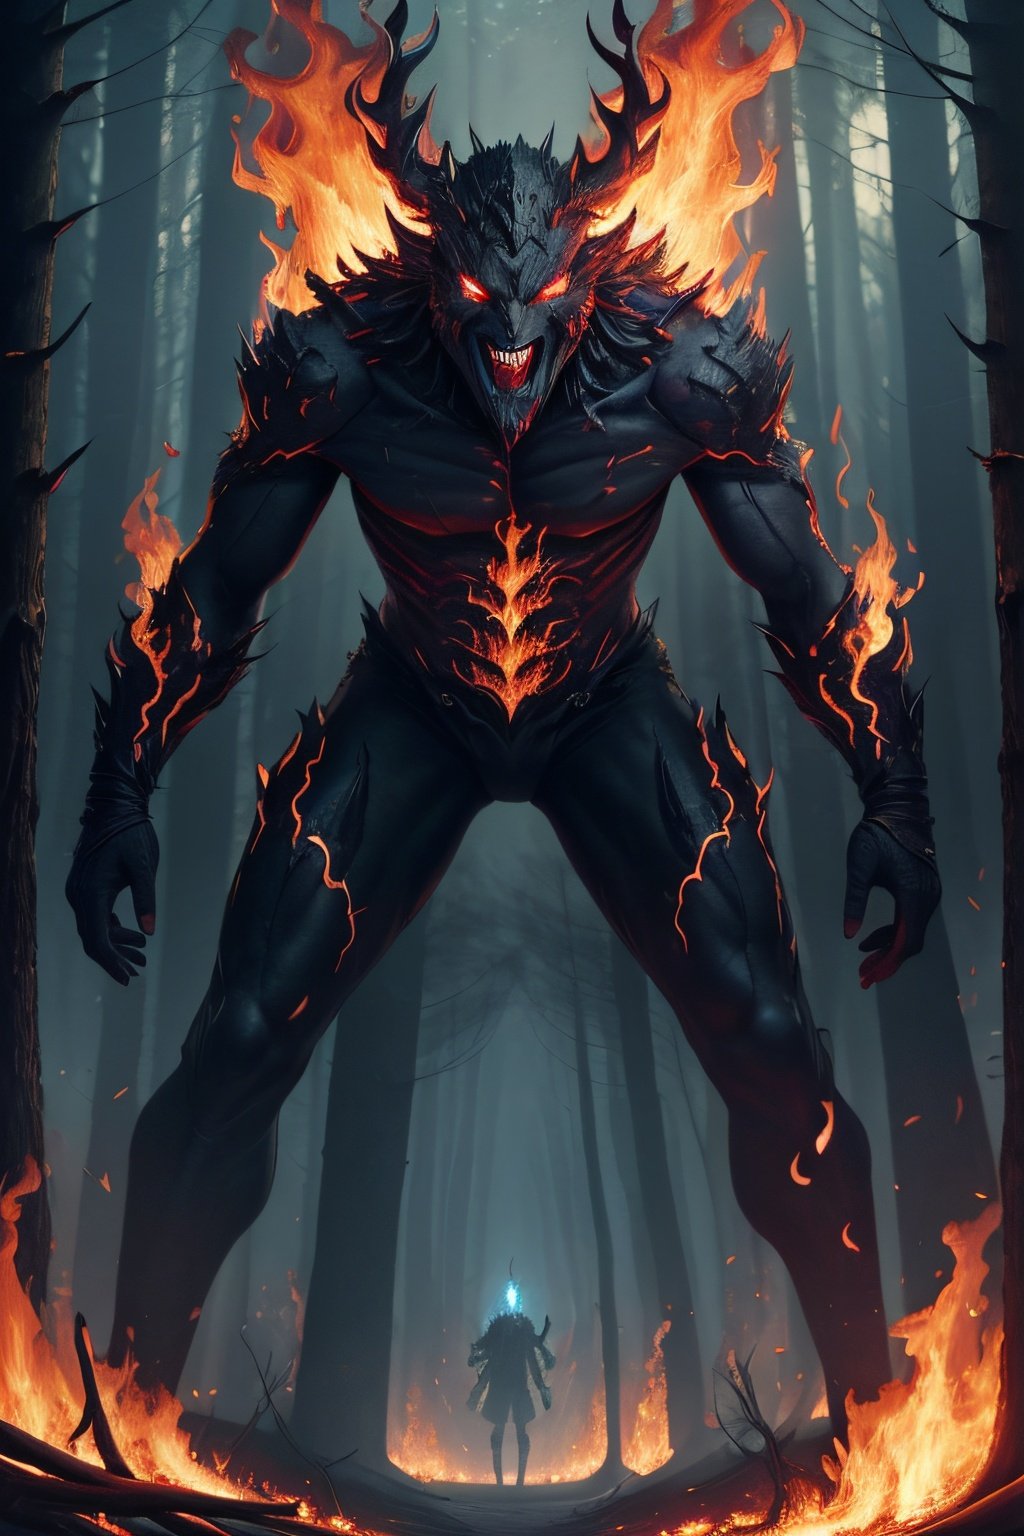 (masterpiece, best quality, official art, beautiful and aesthetic), malicious fire elemental, embodiment evil form, (burning forest), evil eyes, evil smile, glowing eyes and mouth, trees on fire and rising smoke background, faint blue hue, swirling fire, mythical, mystical